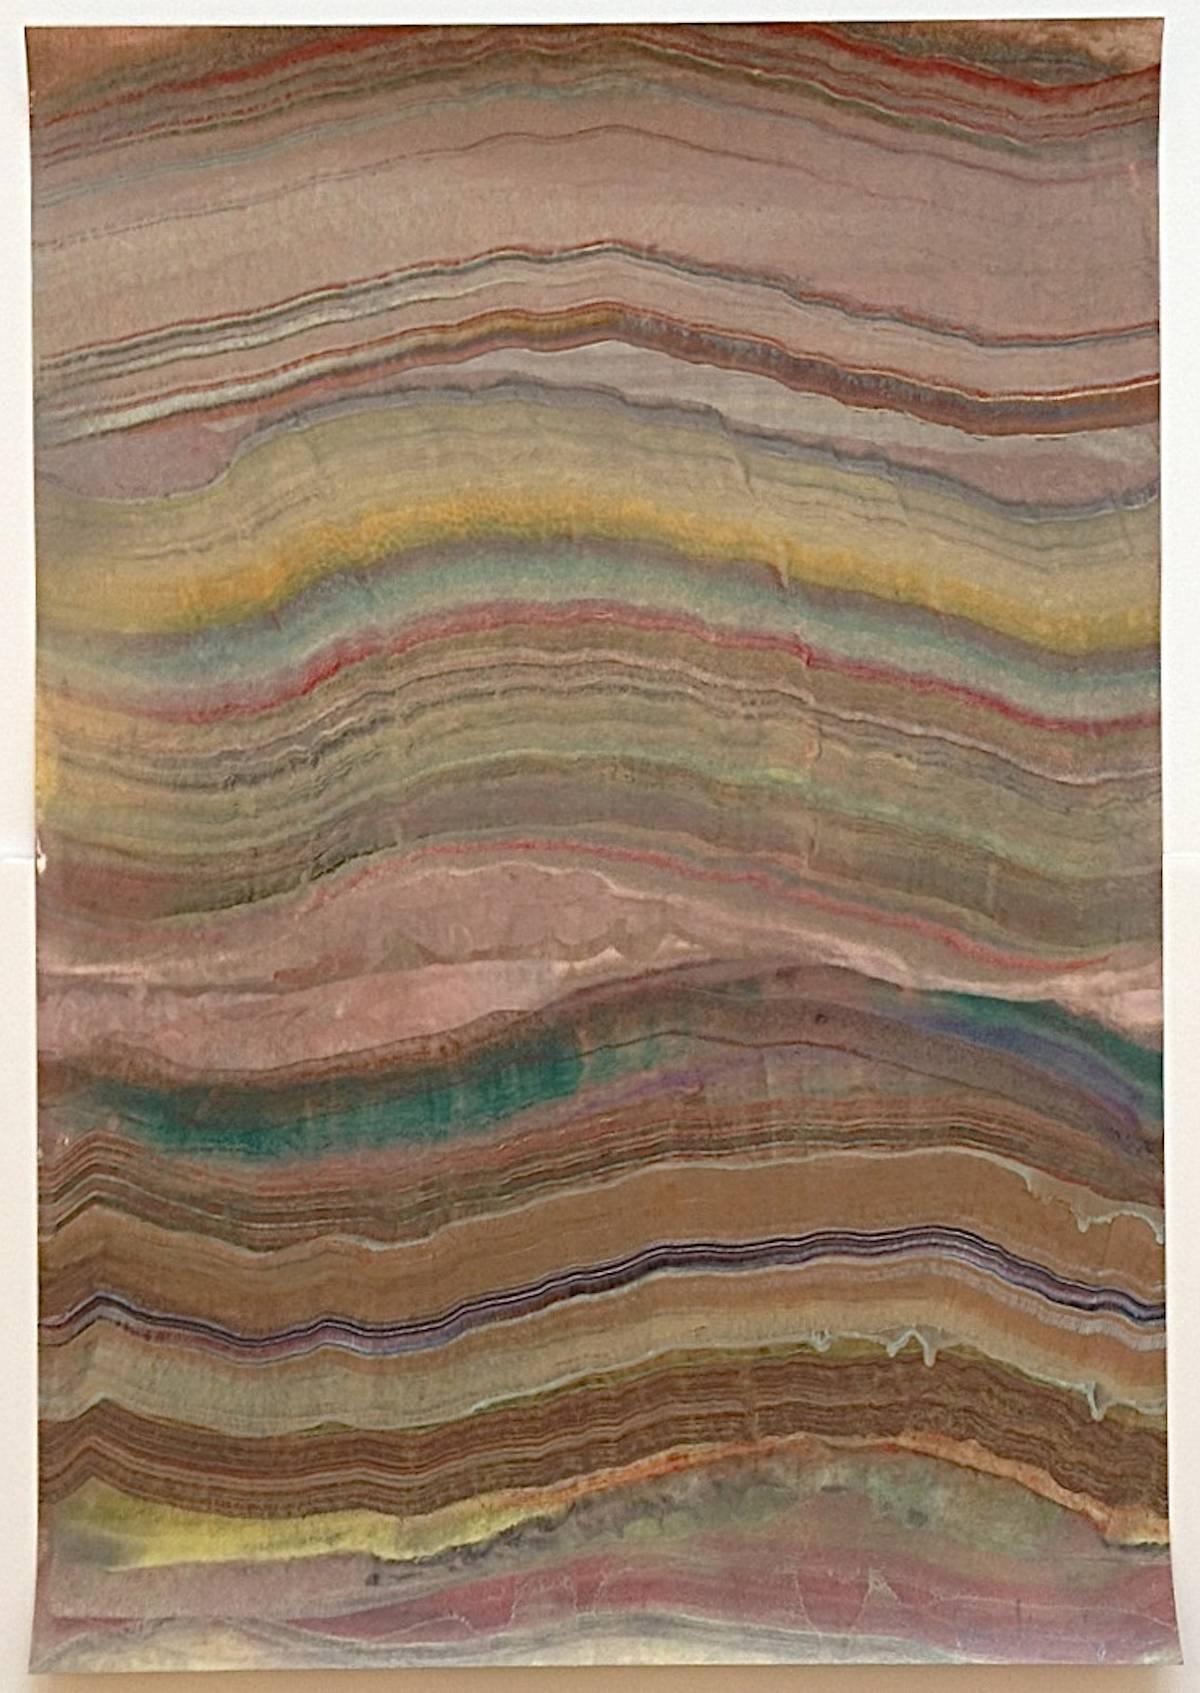 Laura Moriarty Abstract Print - Agates 11, Earthy Brown, Emerald Green, Yellow, Beige Encaustic Monotype